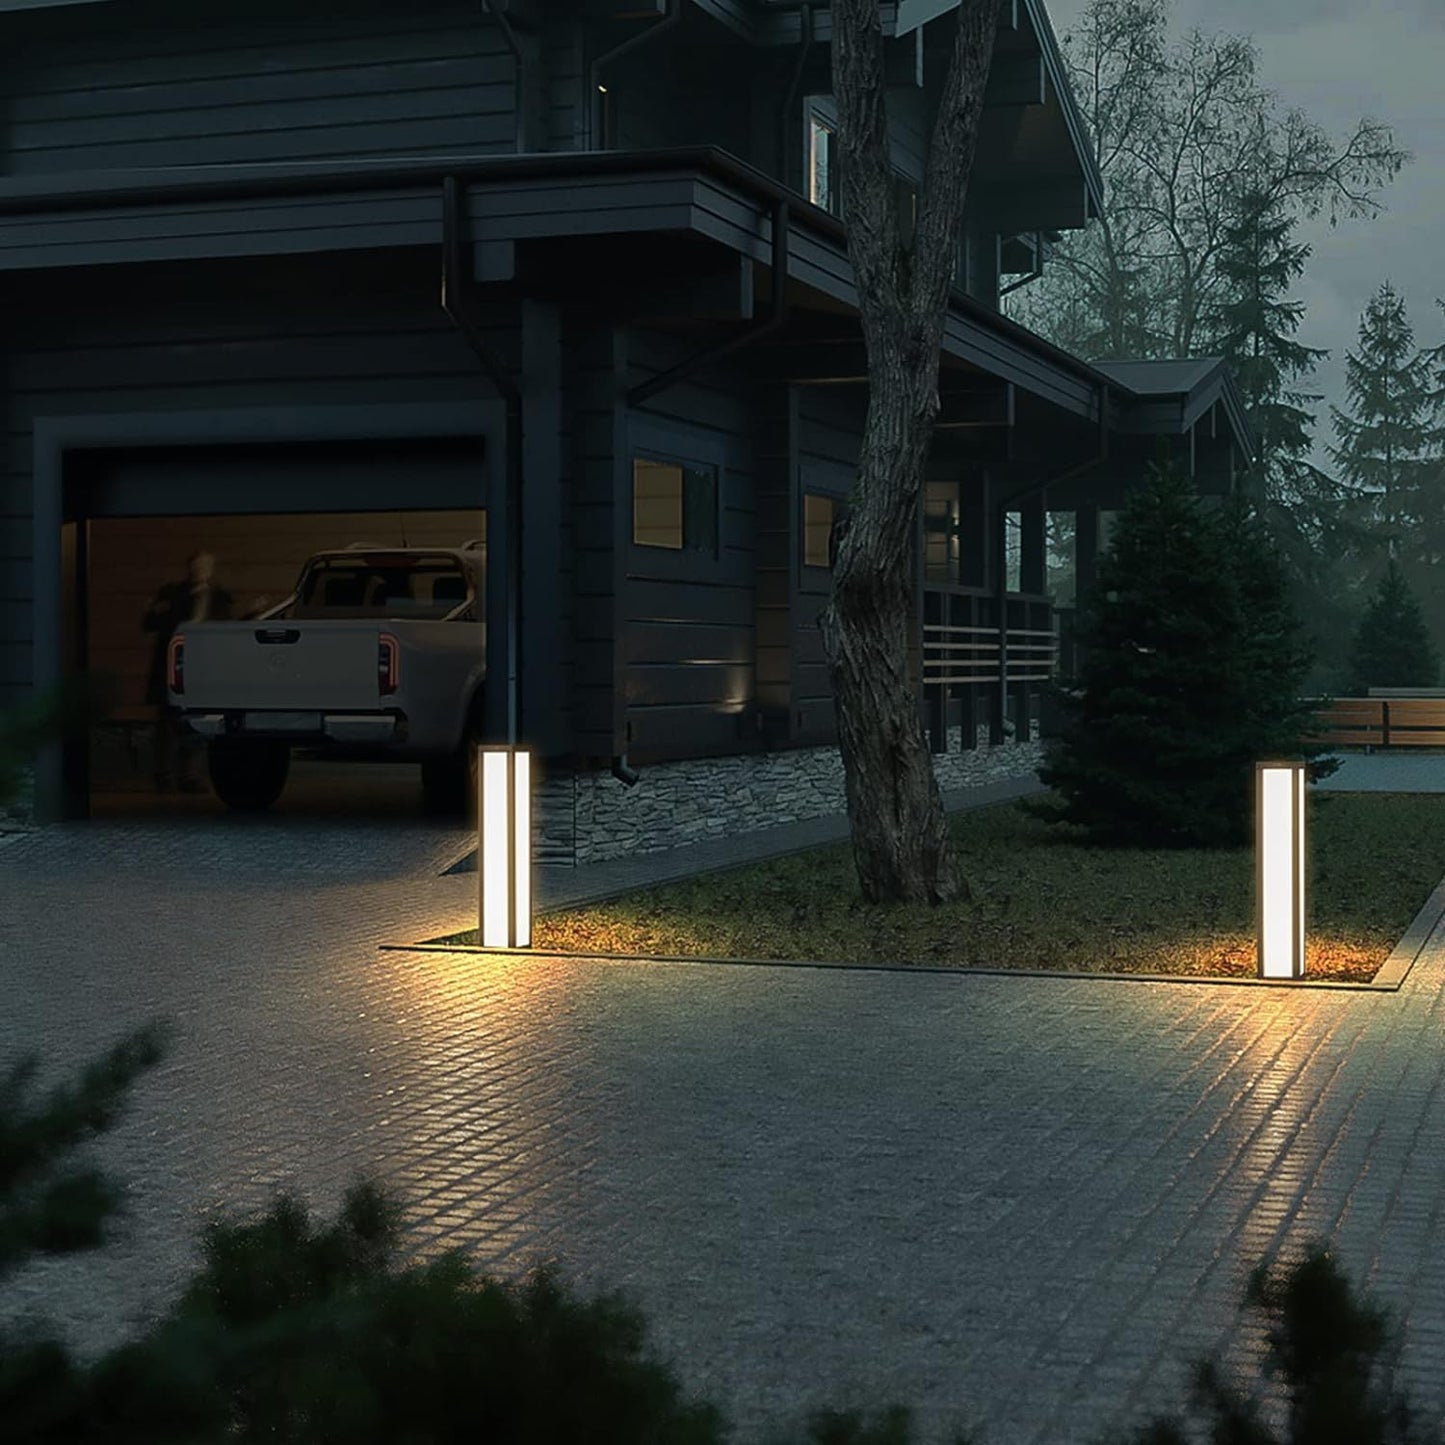 Linkmoon Landscape Path Light, 32' Modern Outdoor LED Luxury Bollard Lighting with IP54 Waterproof for Lawn Courtyard Driveway Pathway Decoration